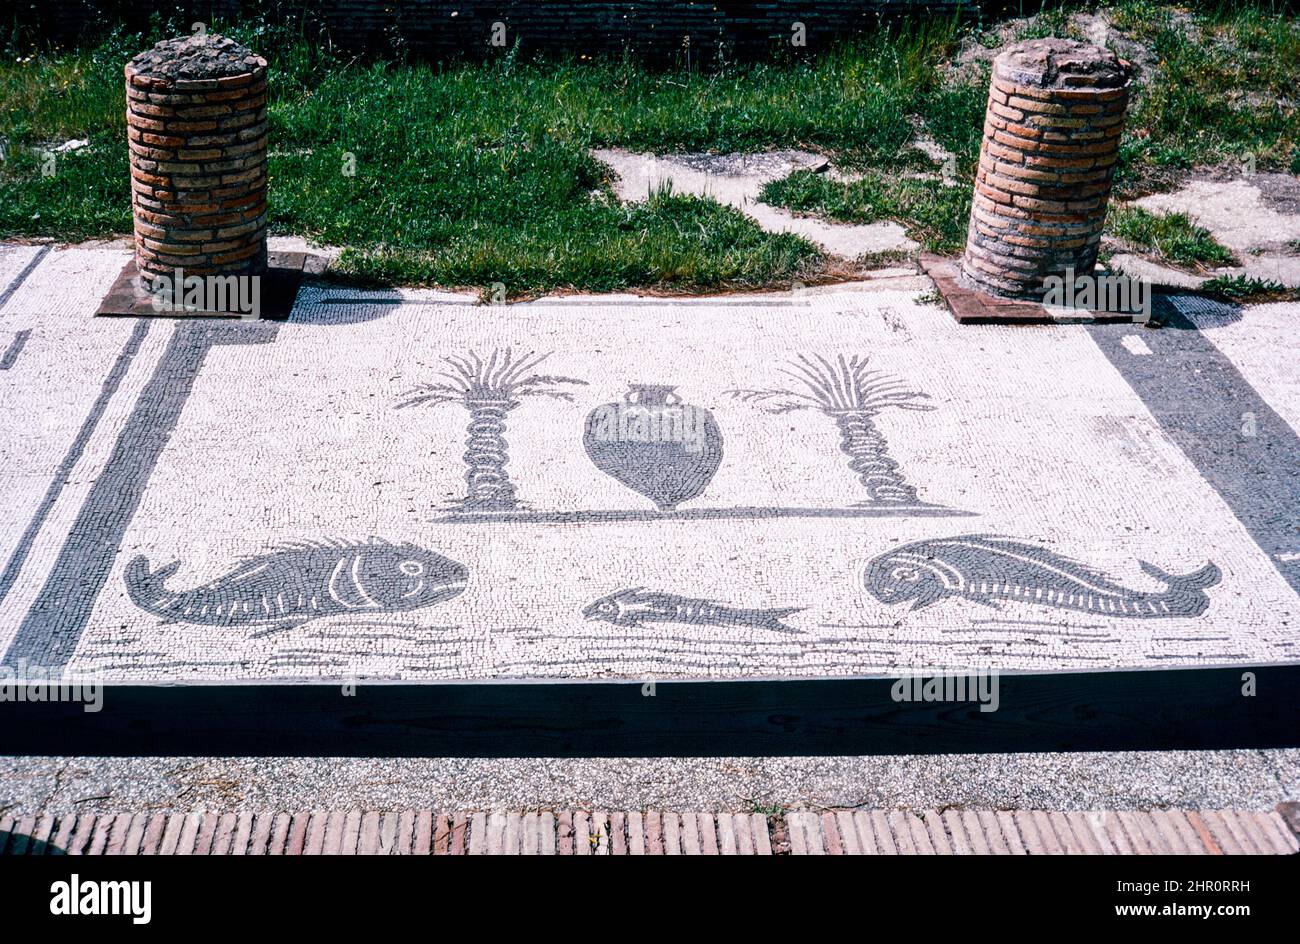 Ostia Antica - large archaeological site in progress, location of the harbour city of ancient Rome. Piazzale delle Corporazioni (Square of the Corporations) Wine and Corn Merchants mosaic.   Archival scan from a slide. April 1970. Stock Photo